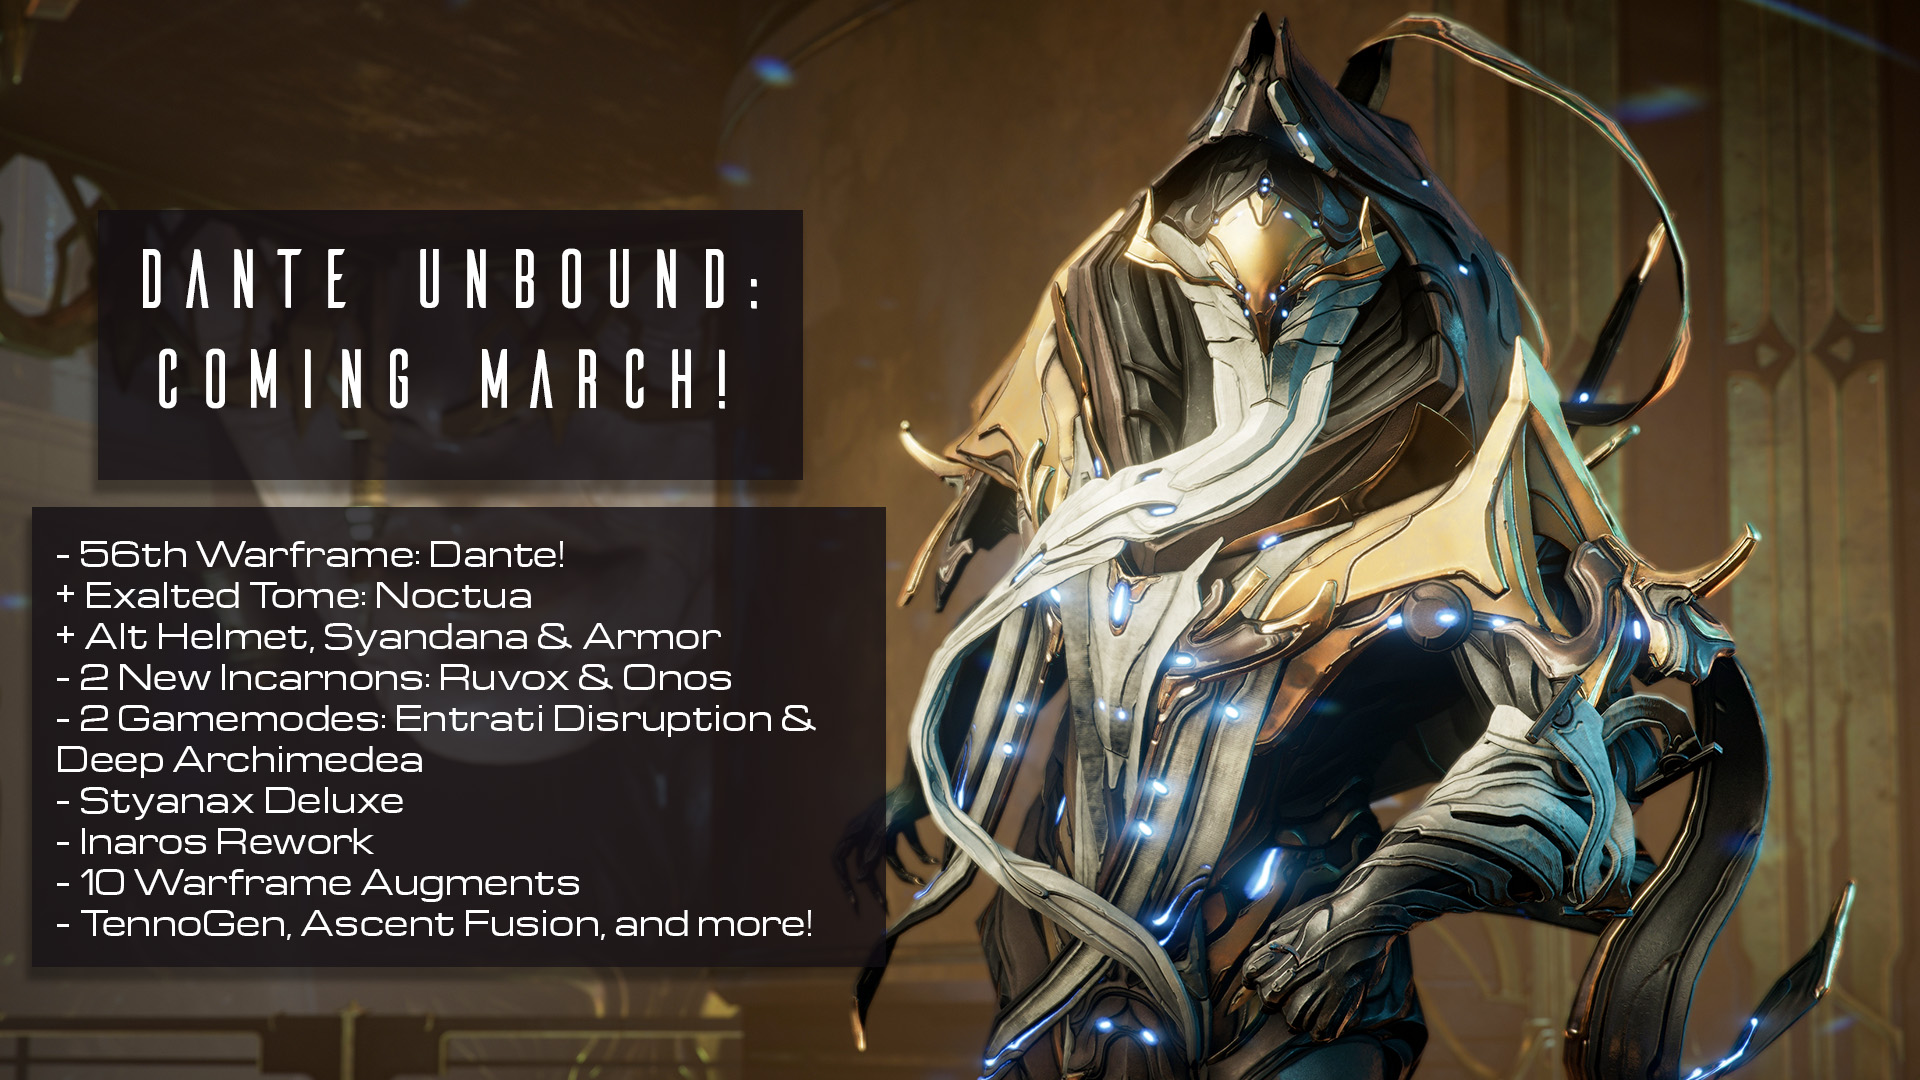 Warframe' Is Getting Crossplay And Cross-Save, Yes, Even With PS4 And PS5